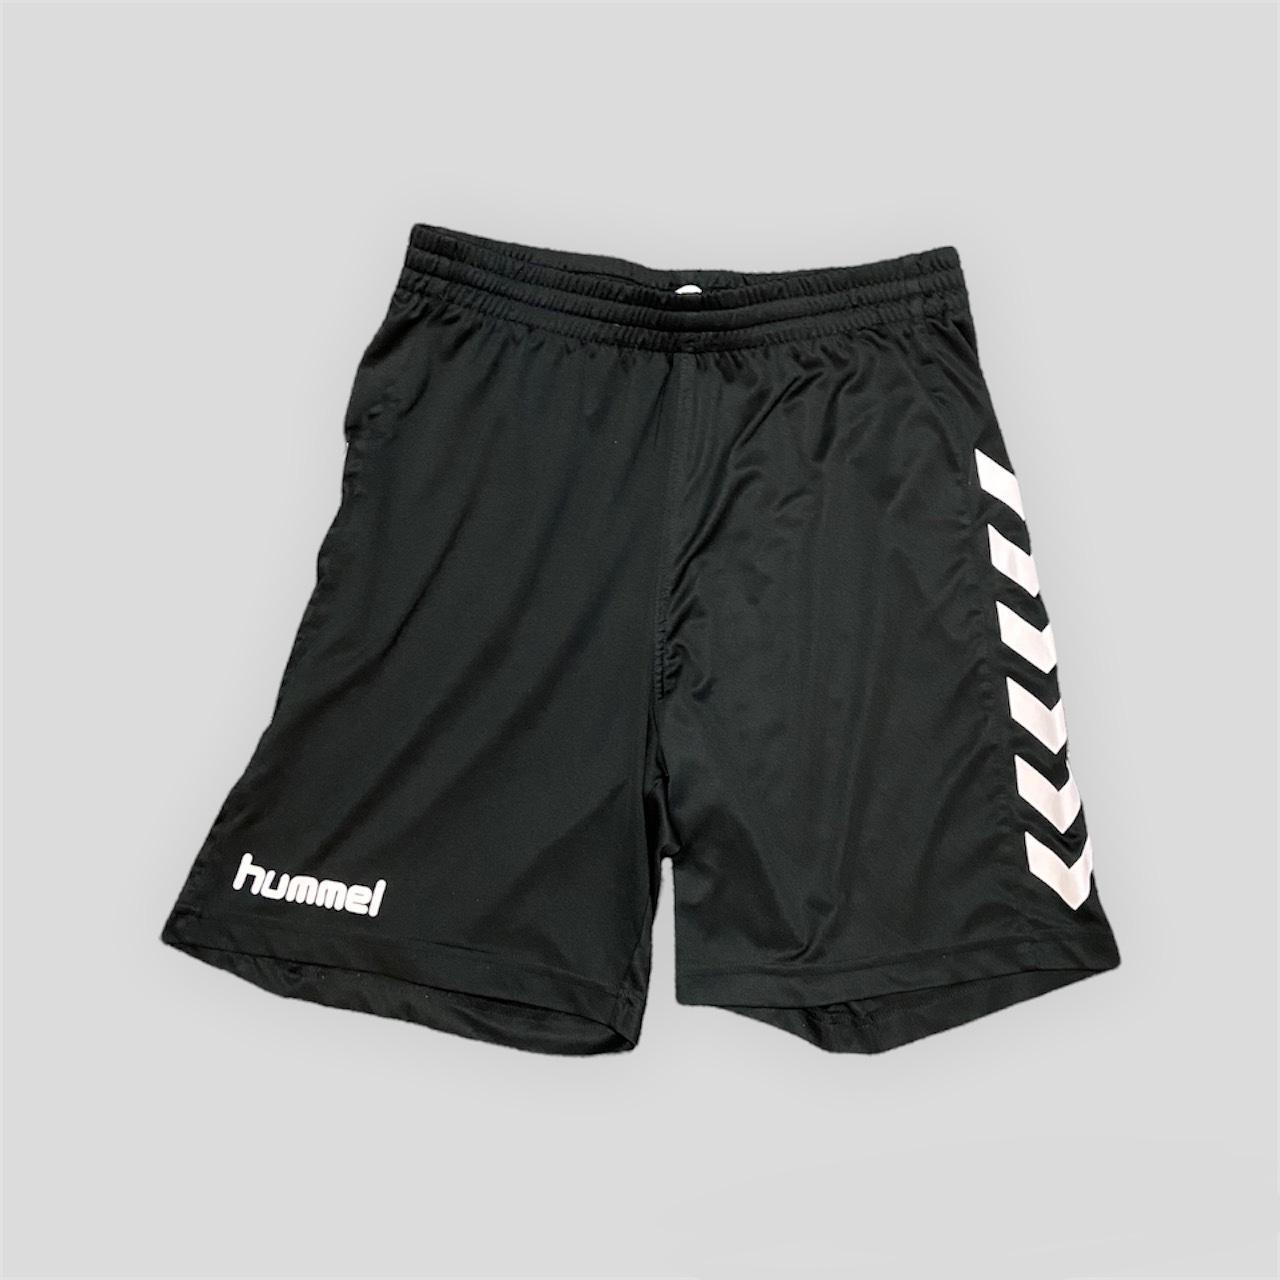 Product Image 1 - Hummel Soccer Shorts

Condition: 10/10
Size: Small